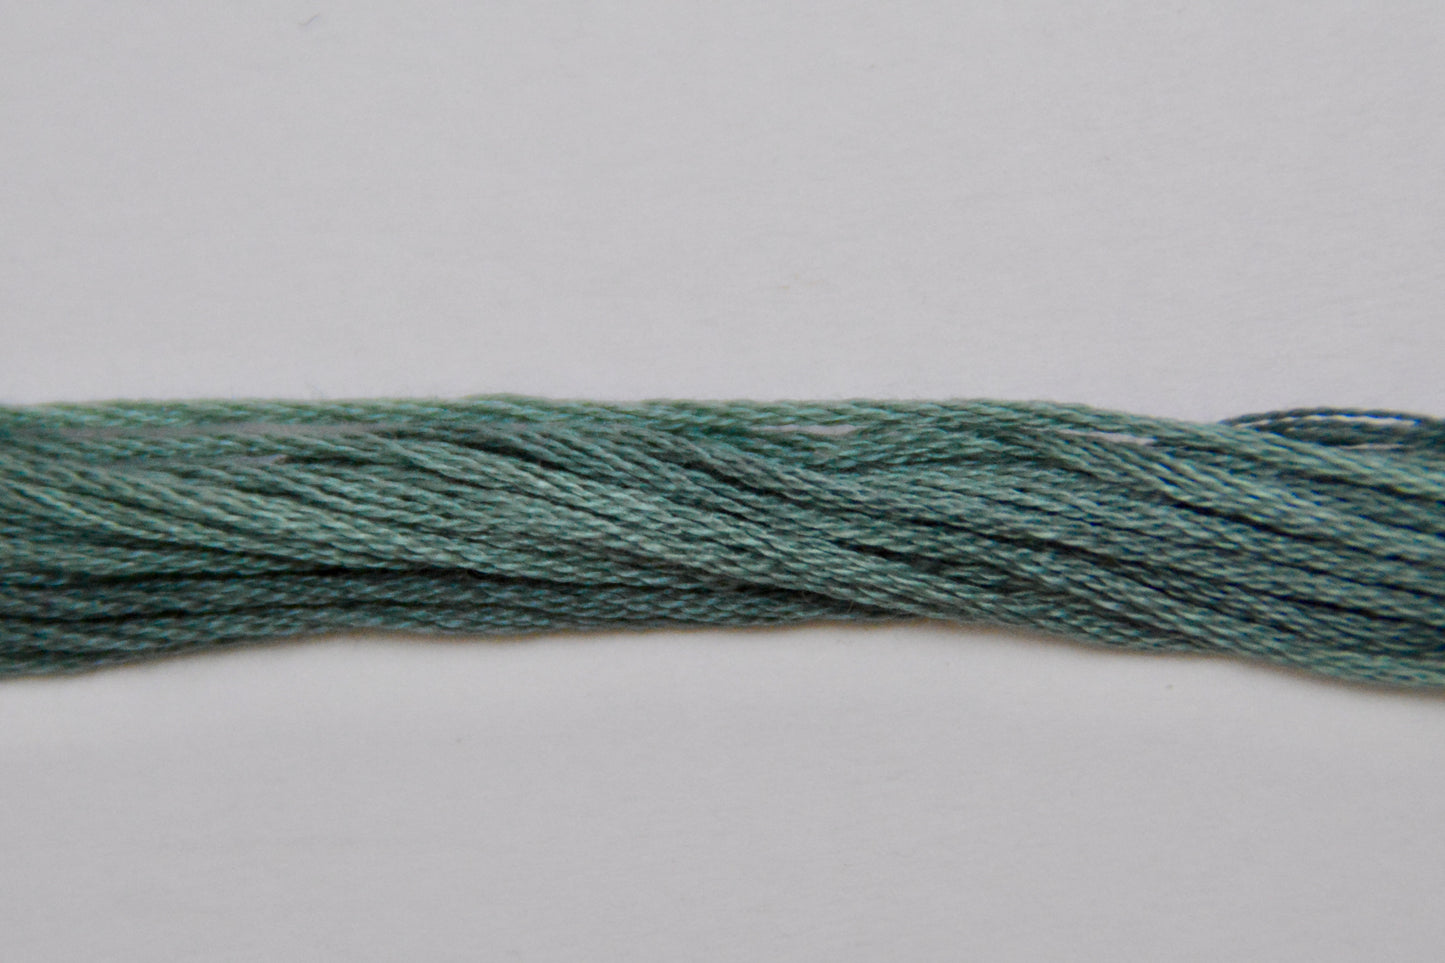 Tartan Plaid Classic Colorworks 6 Strand Hand-Dyed Embroidery Floss